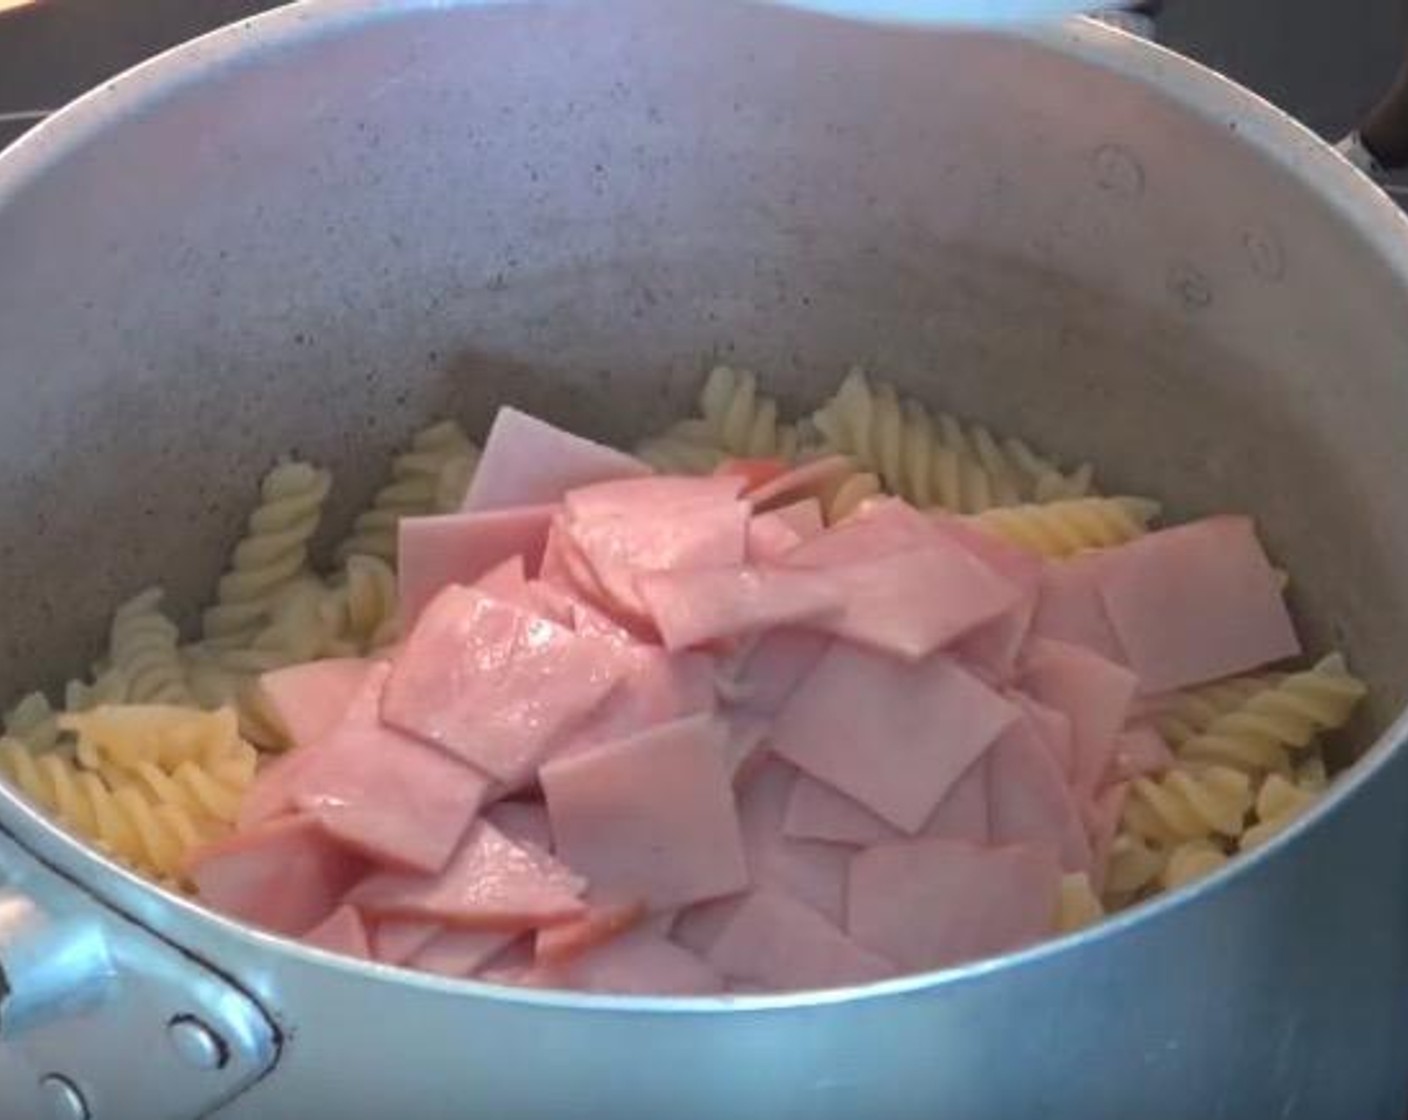 step 2 In a large pot, add Pasta (1.1 lb), Ham Slices (7 oz) and egg mixture. Over a low heat, cook for 2-3 minutes, until everything is warmed through.